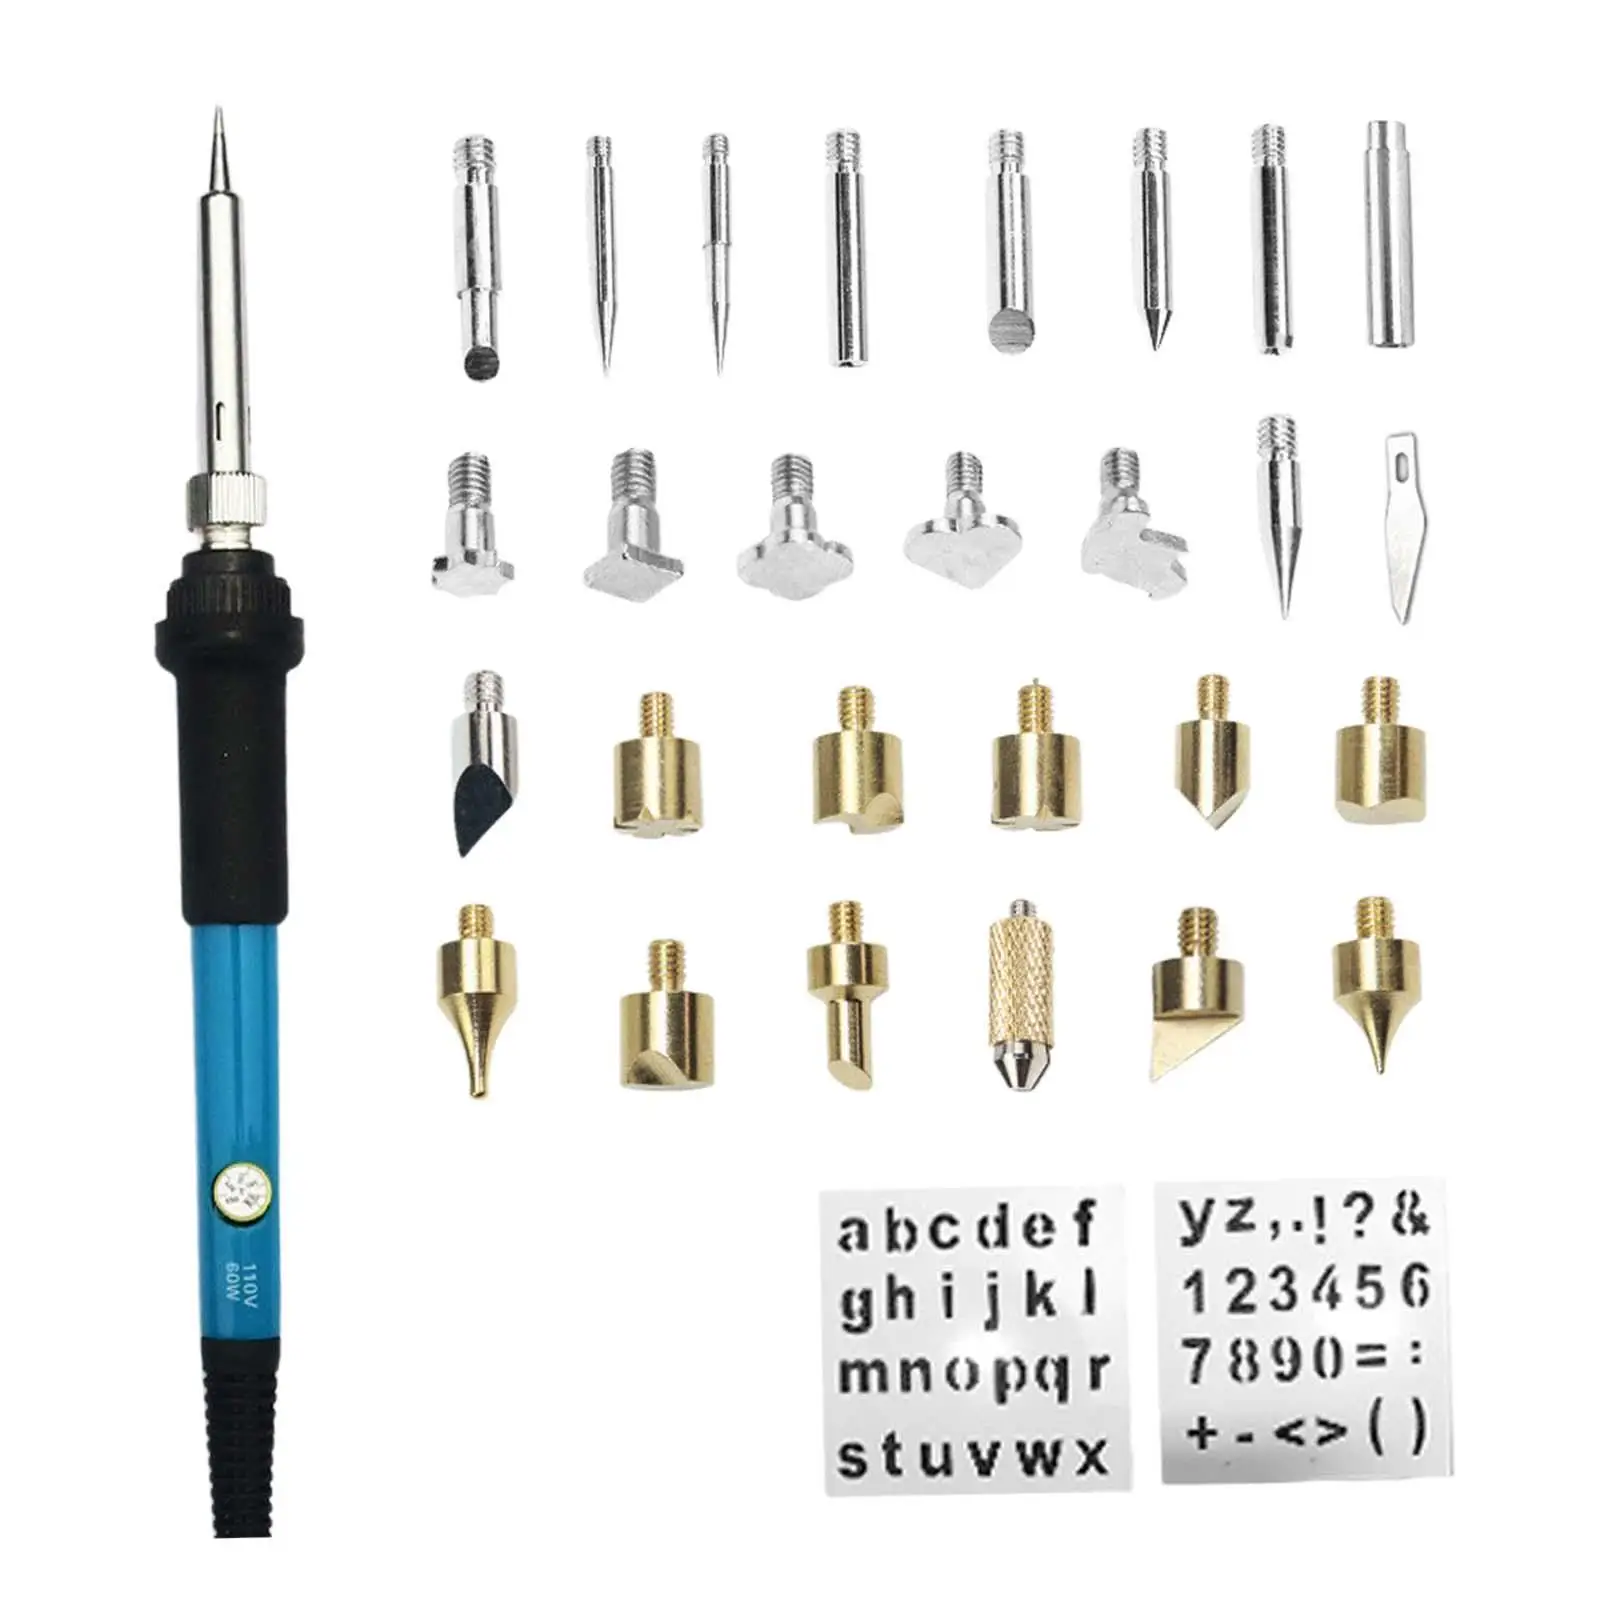 30Pcs Solder Iron Tool Jewelry Wood Painting Electric Welding Repair Tool 60W Portable Temperature Adjustable Soldering Iron Kit